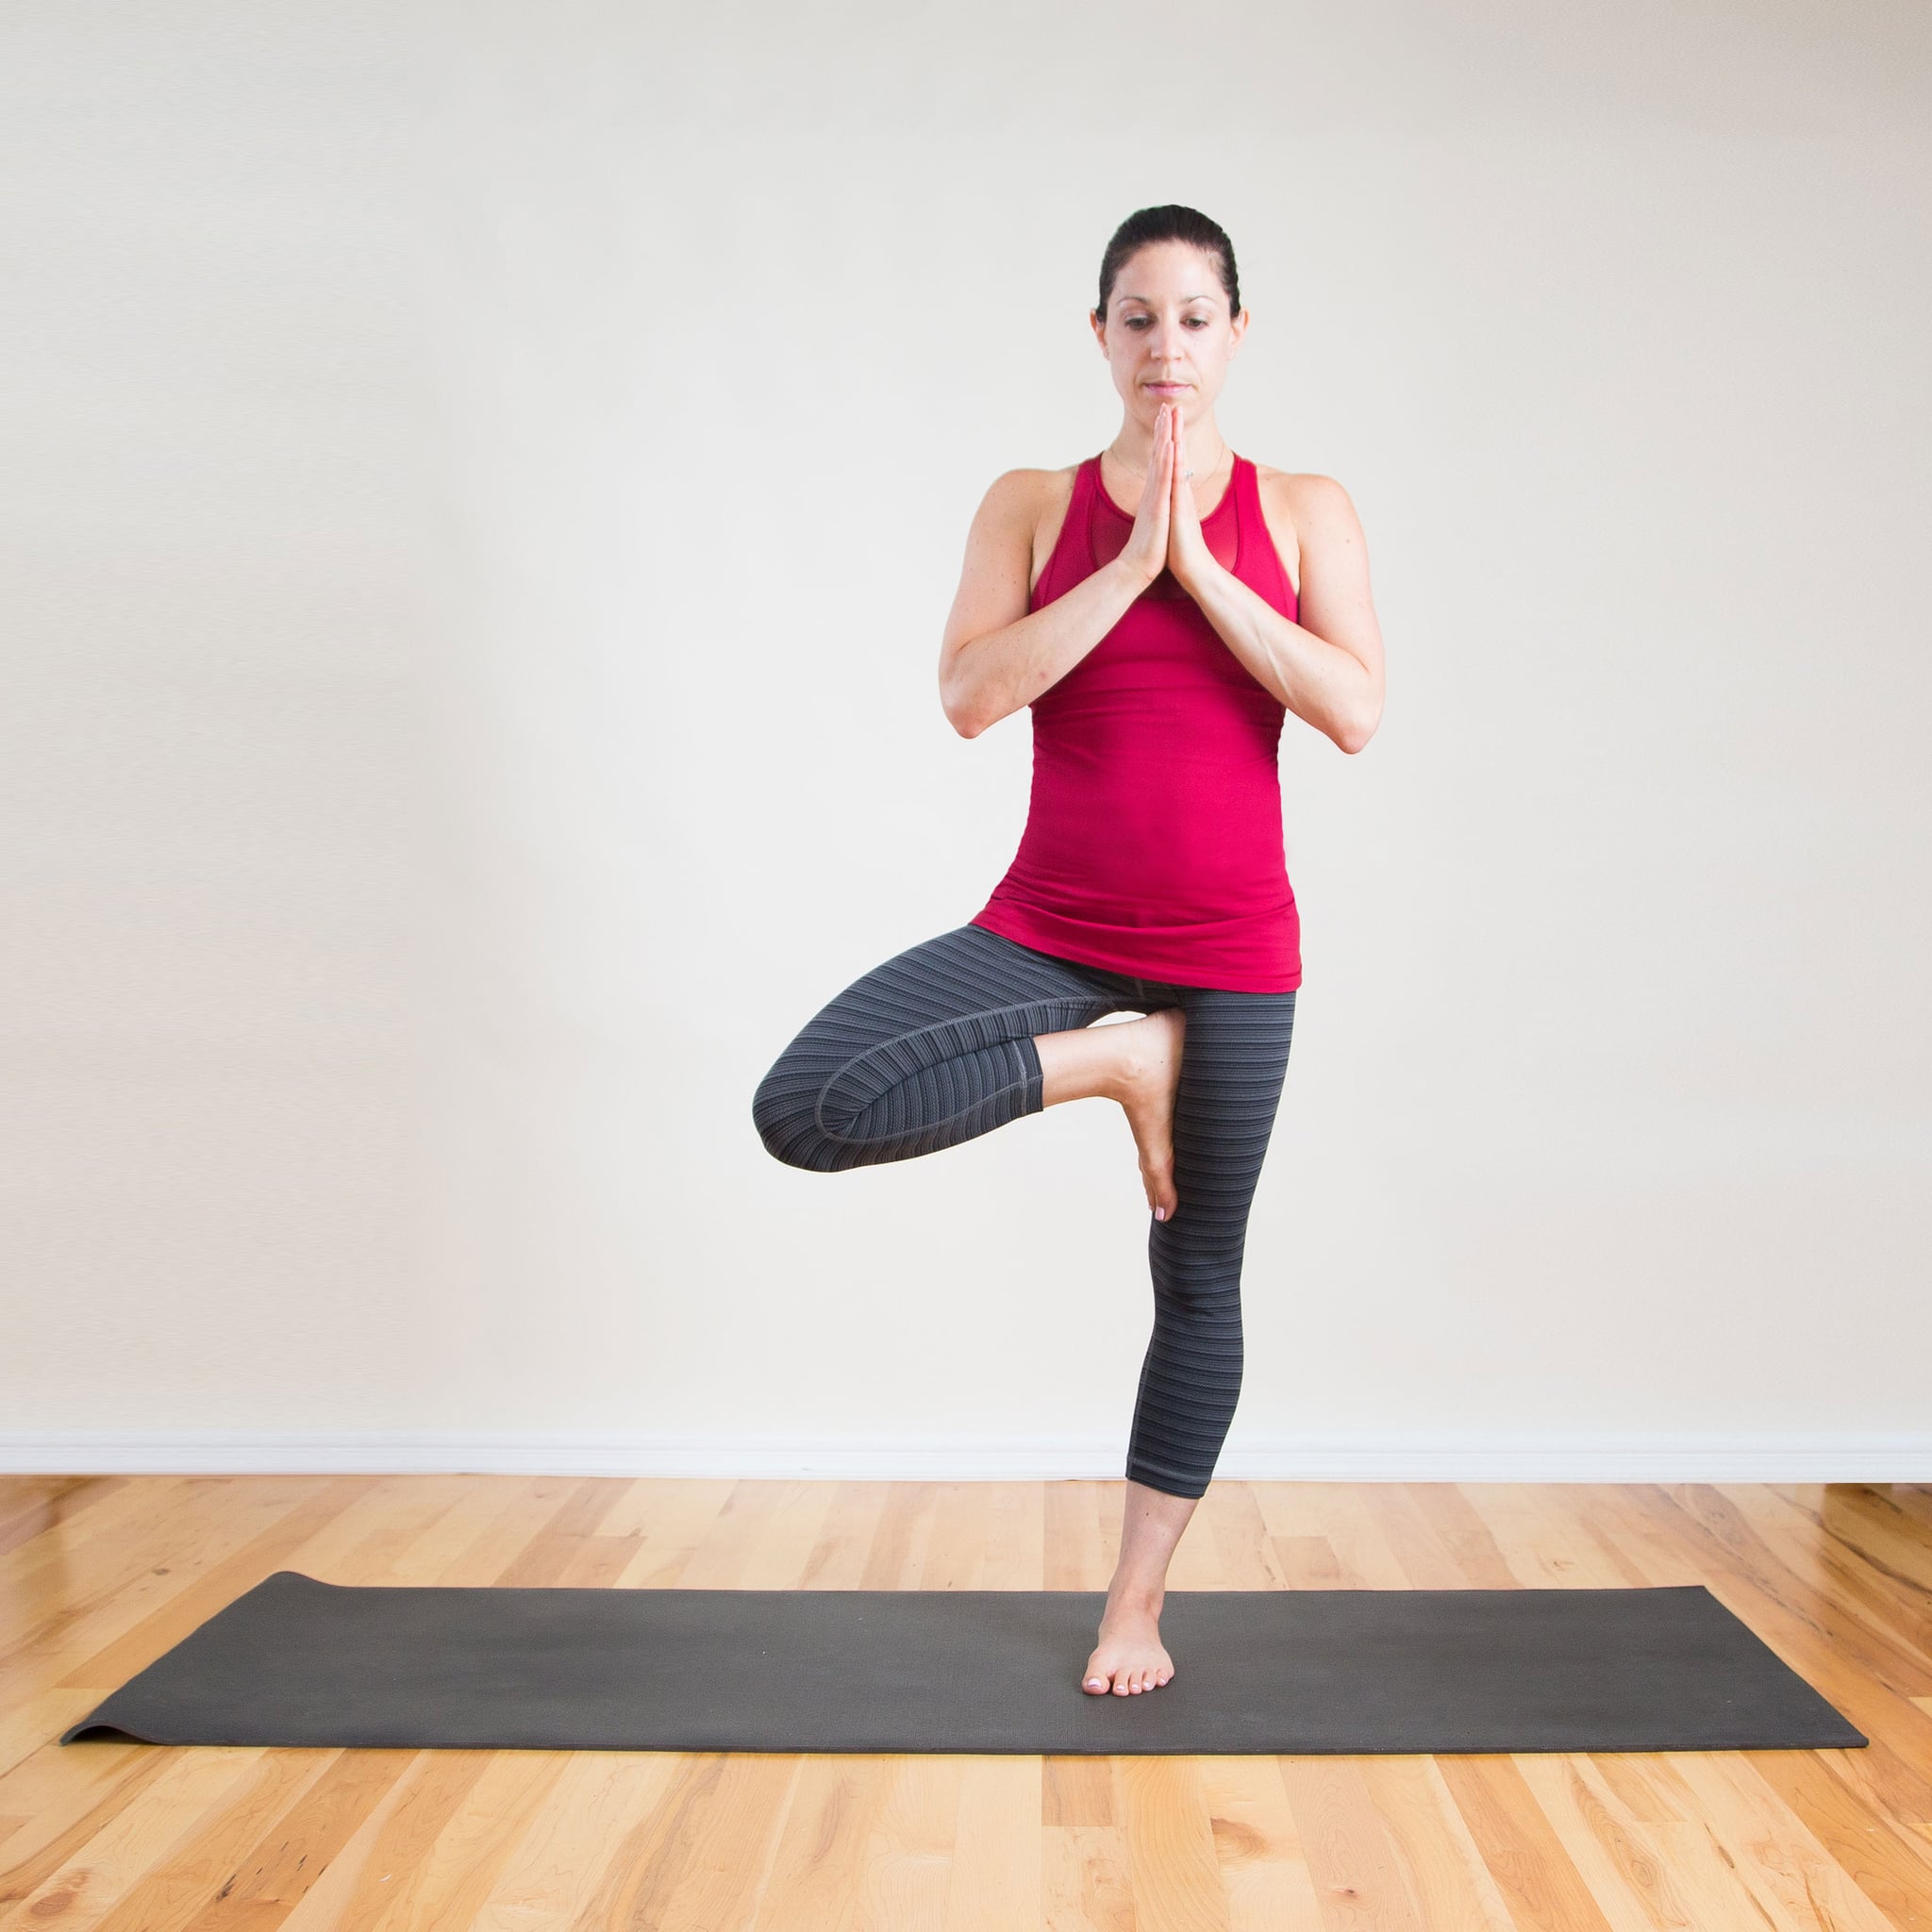 Vrksasana or Tree Pose: Meaning, Benefits & How to Do